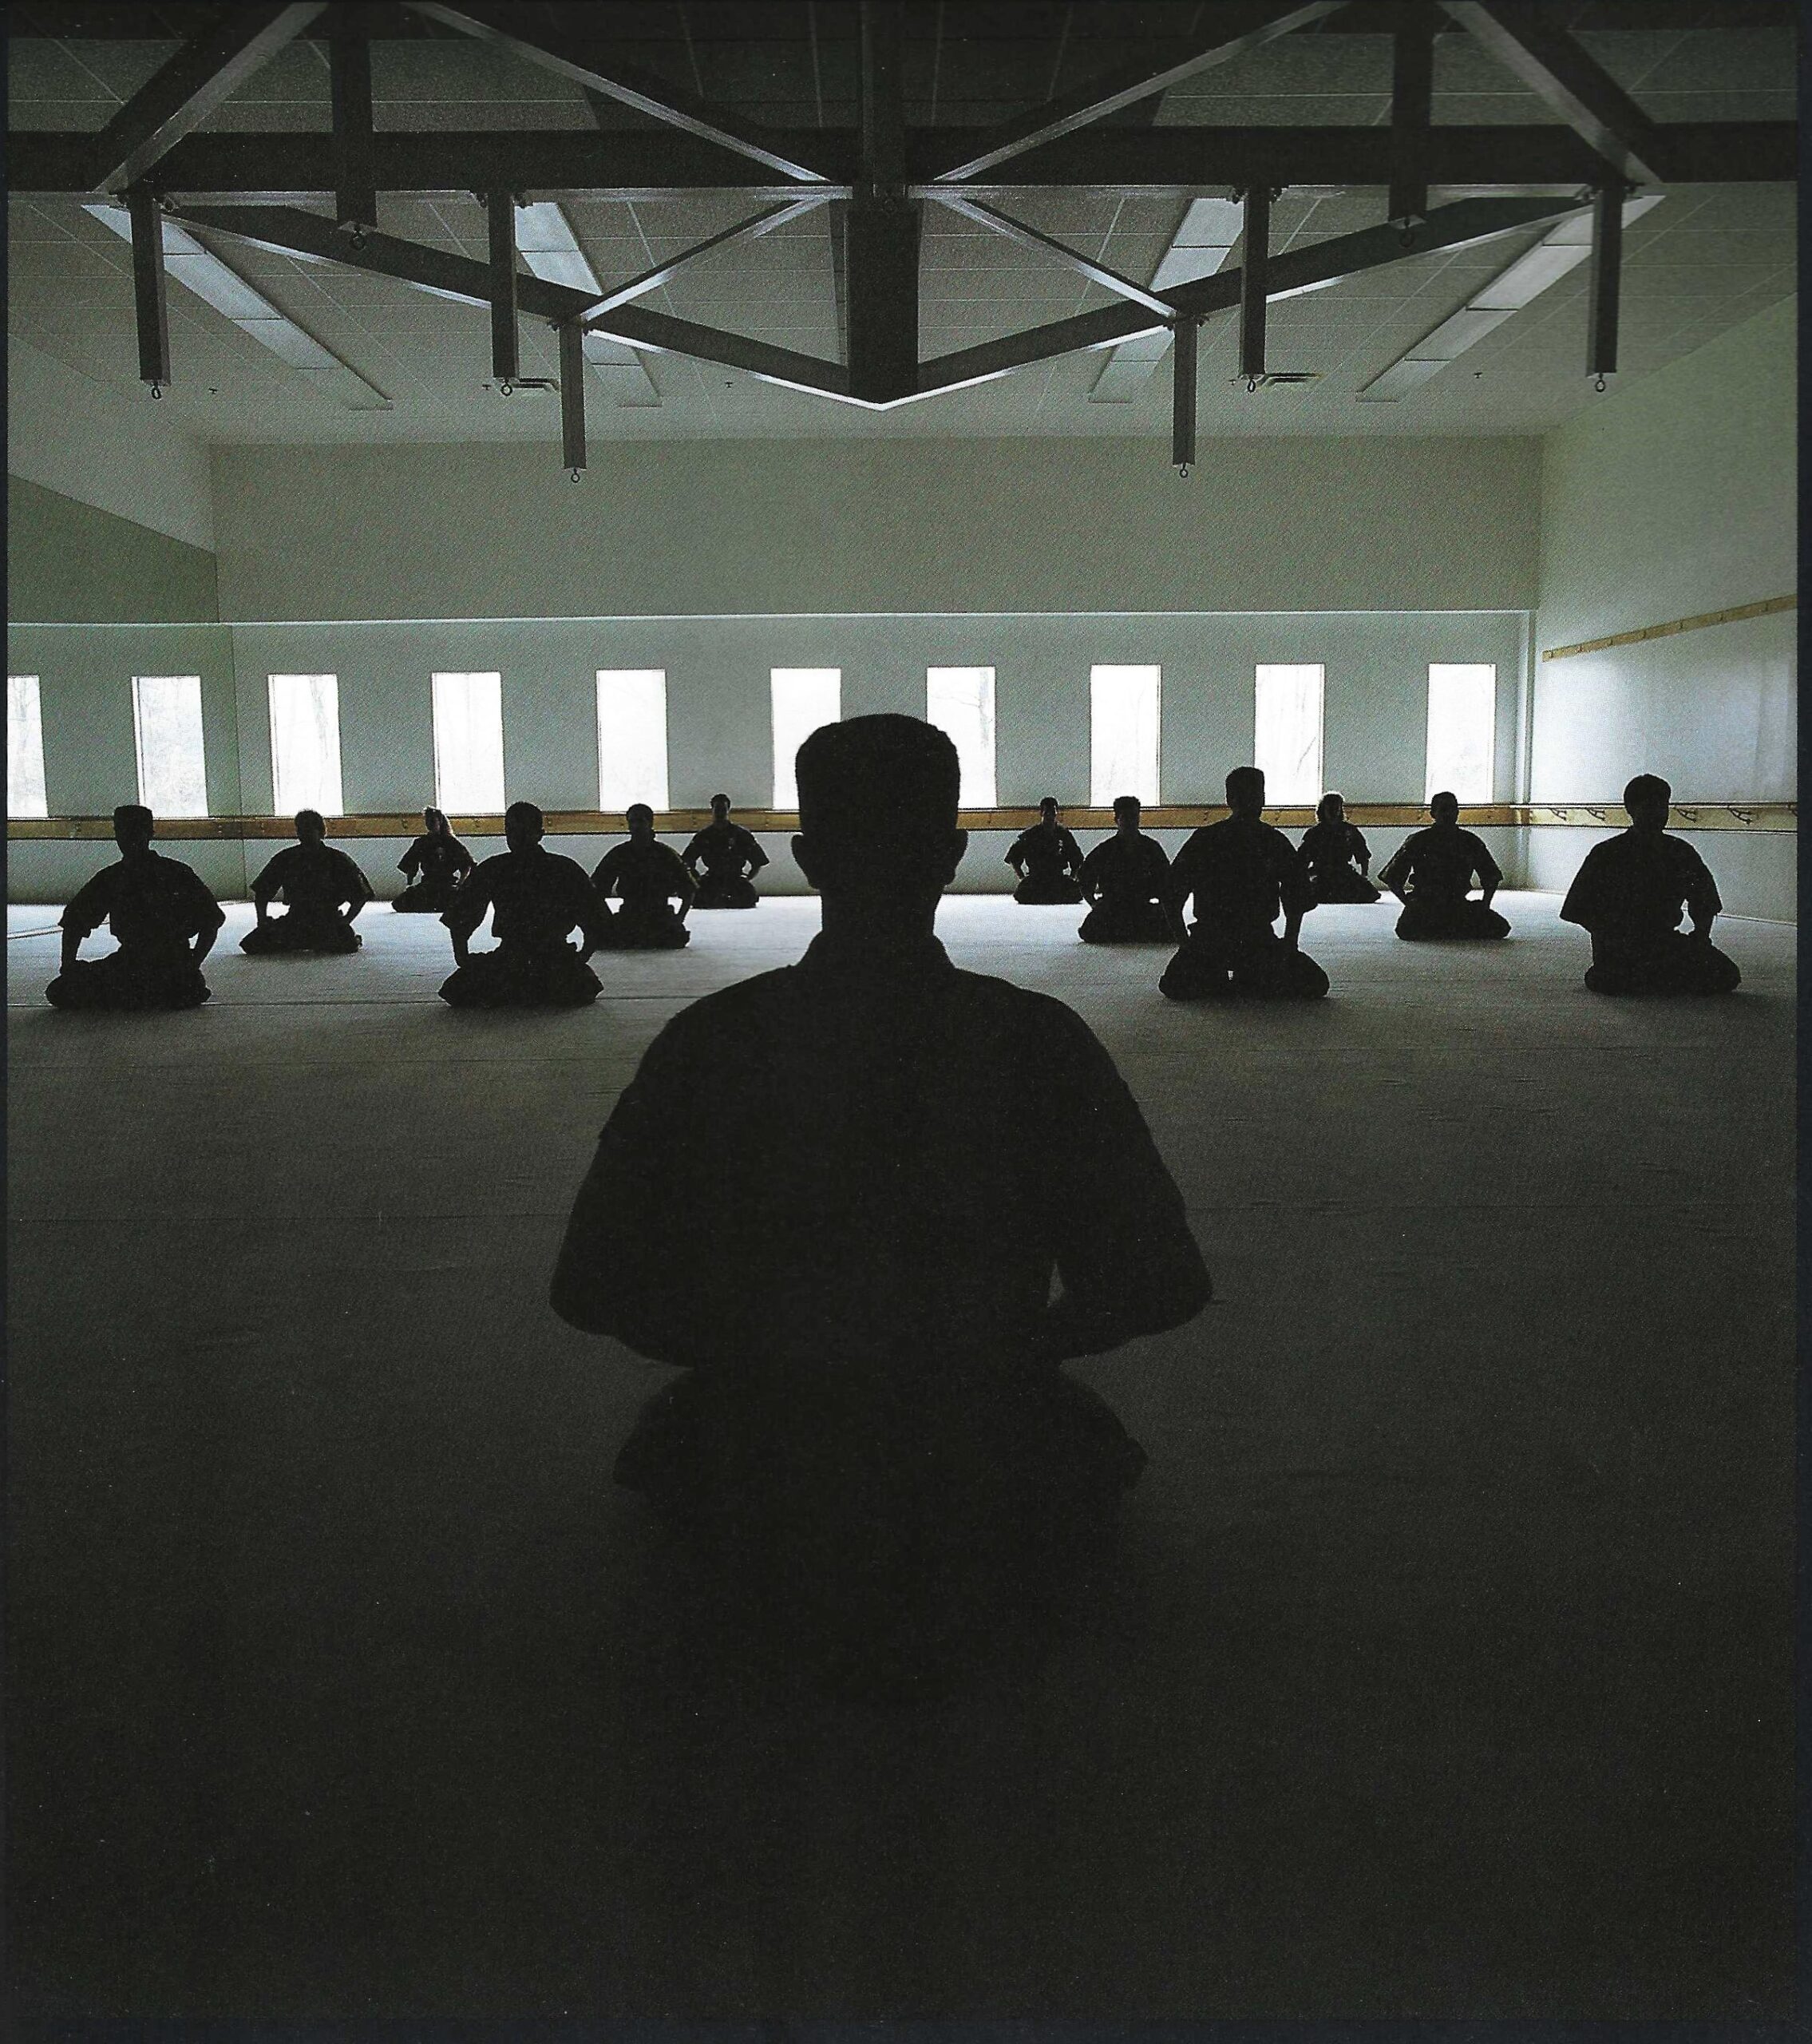 Silhouettes of people in a lotus pose.